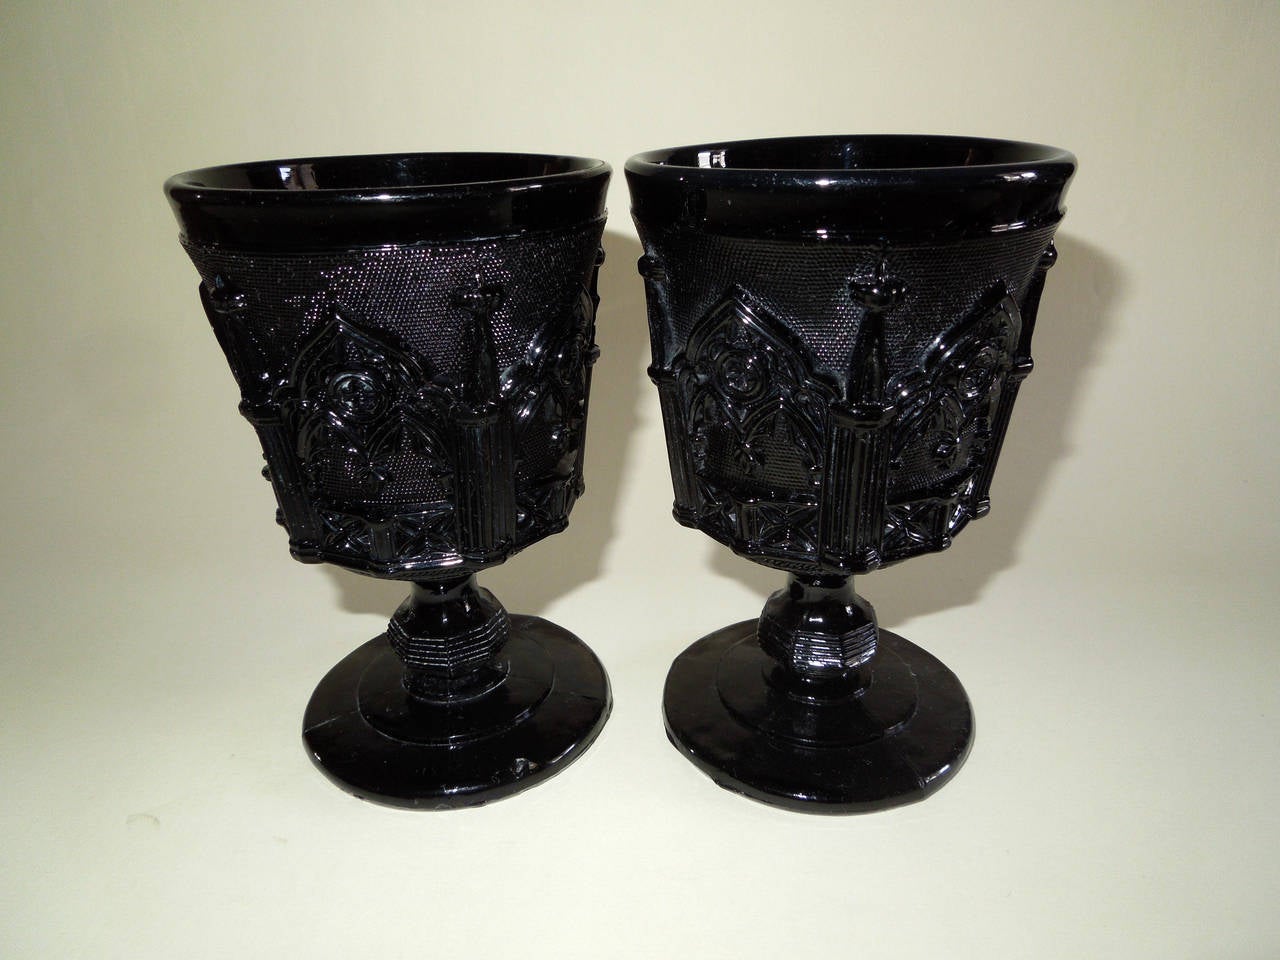 Two Gothic Revival pressed opaque black glass wine or water goblets, made by the Cristalleries Saint Louis. There is another example in the Paris, Musée des Arts Décoratifs.